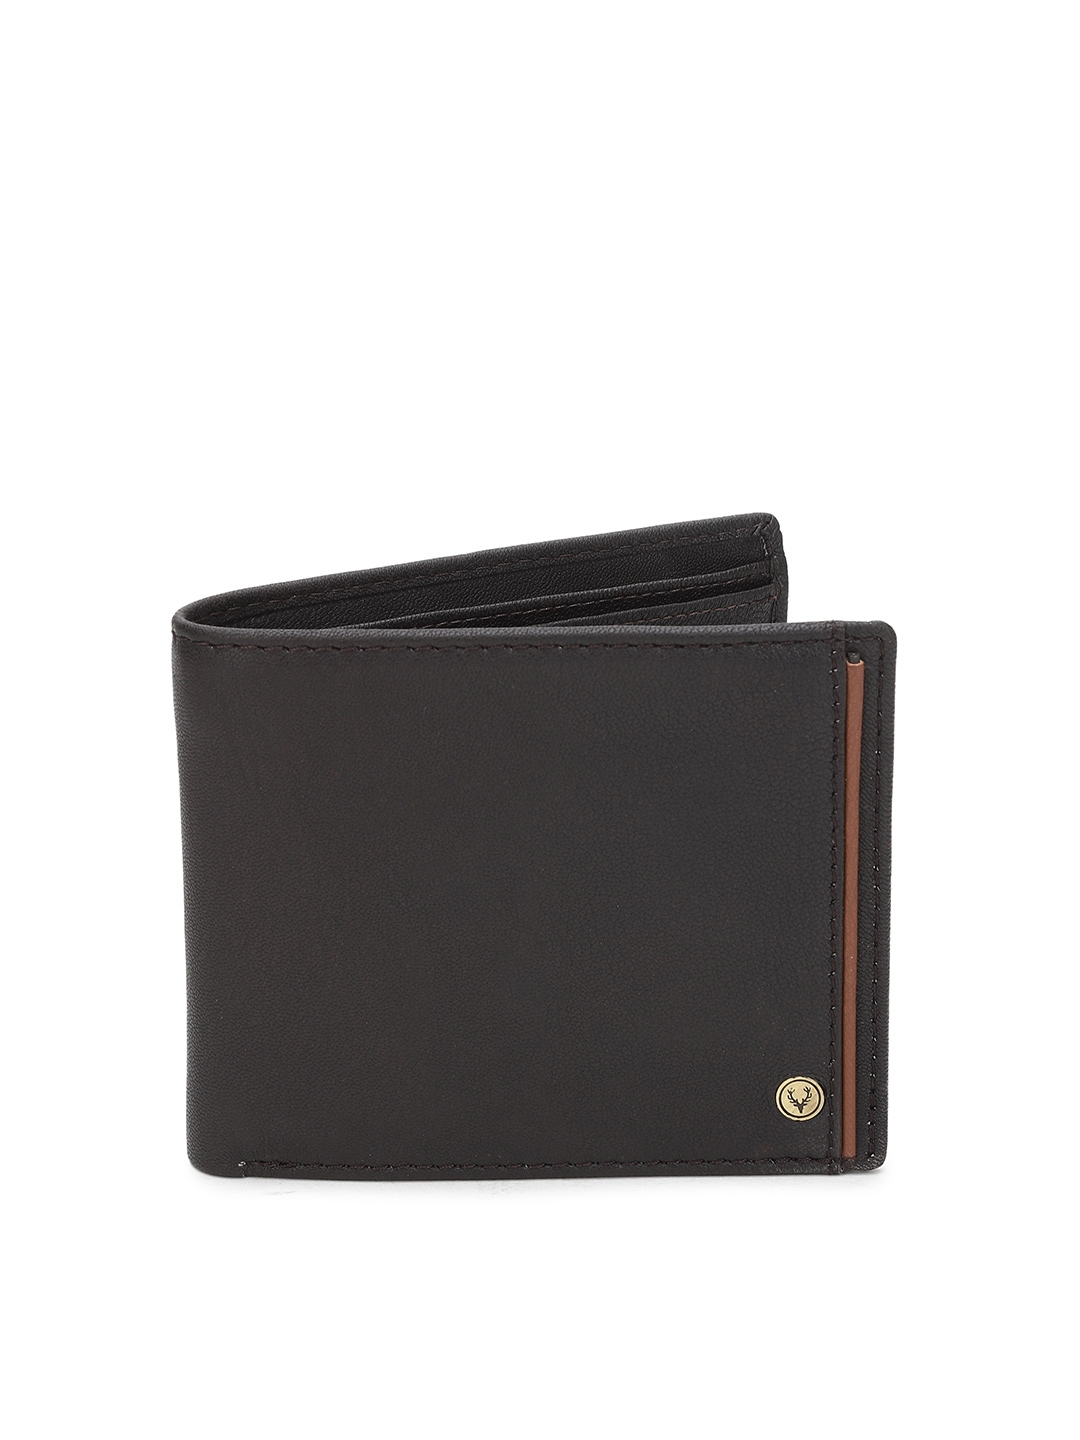 Buy Allen Solly Men Coffee Brown Solid Two Fold Leather Wallet ...